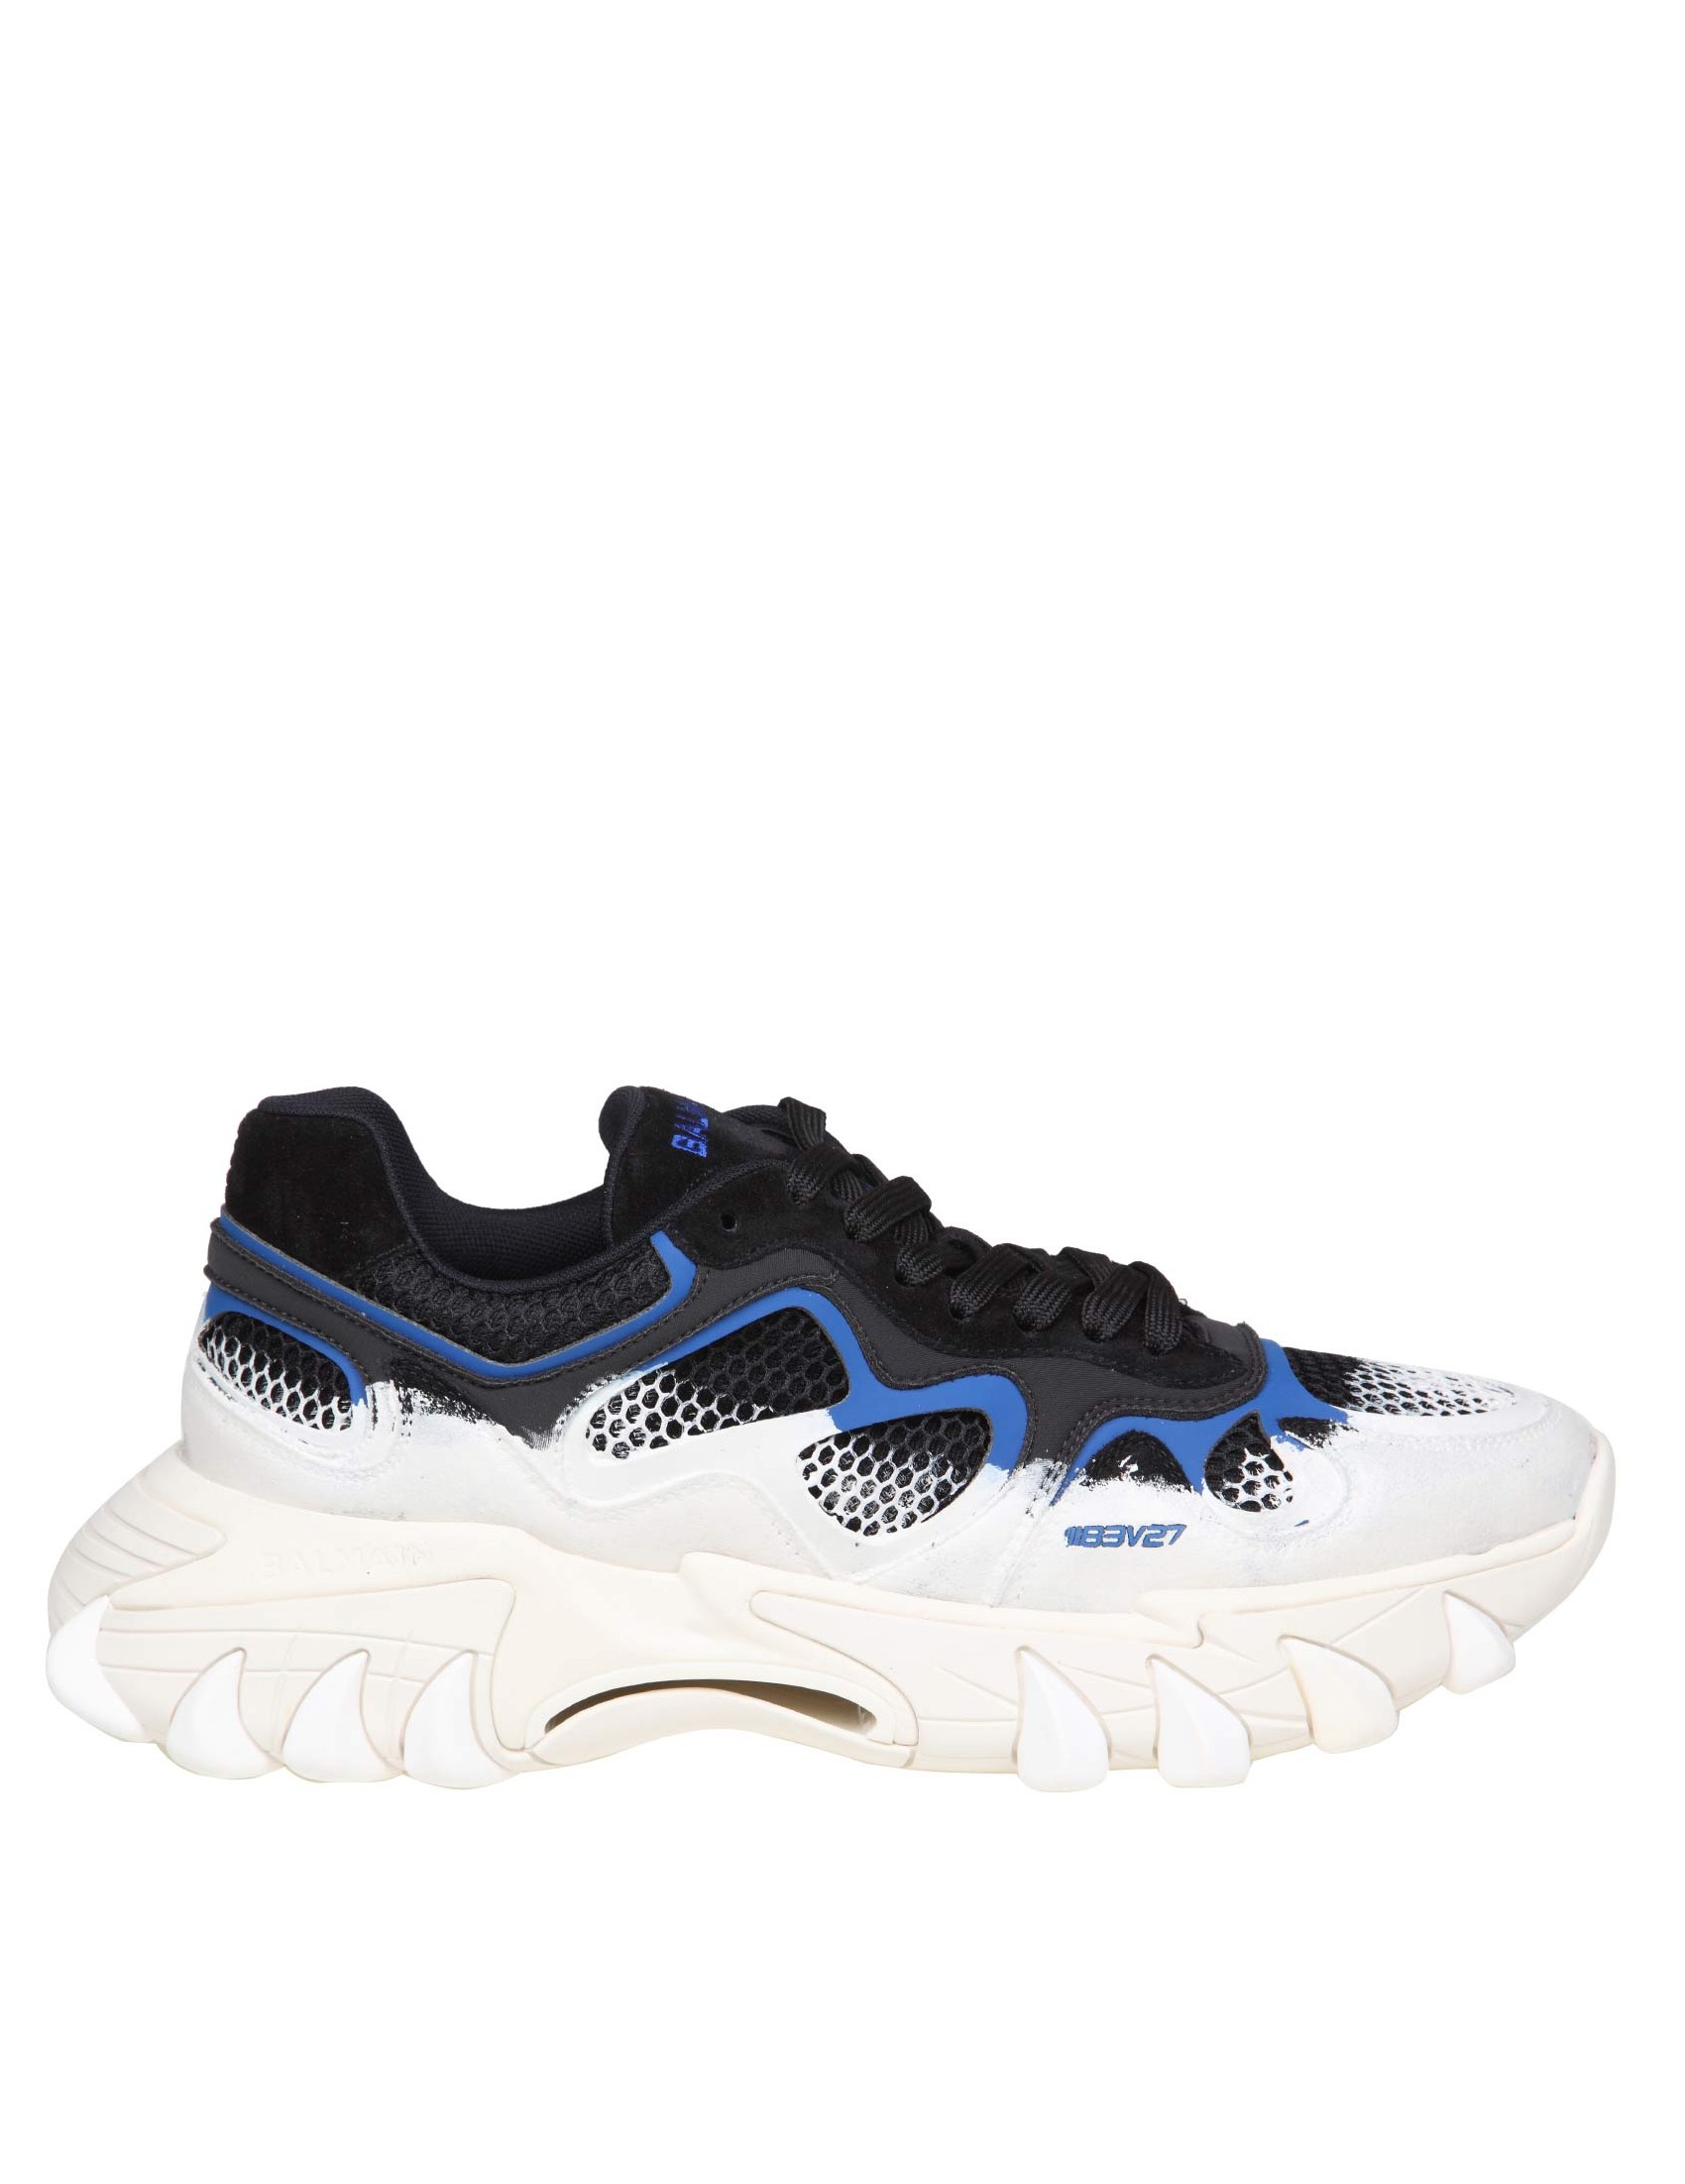 BALMAIN B-EAST SNEAKERS IN BLACK AND BLUE LEATHER AND MESH